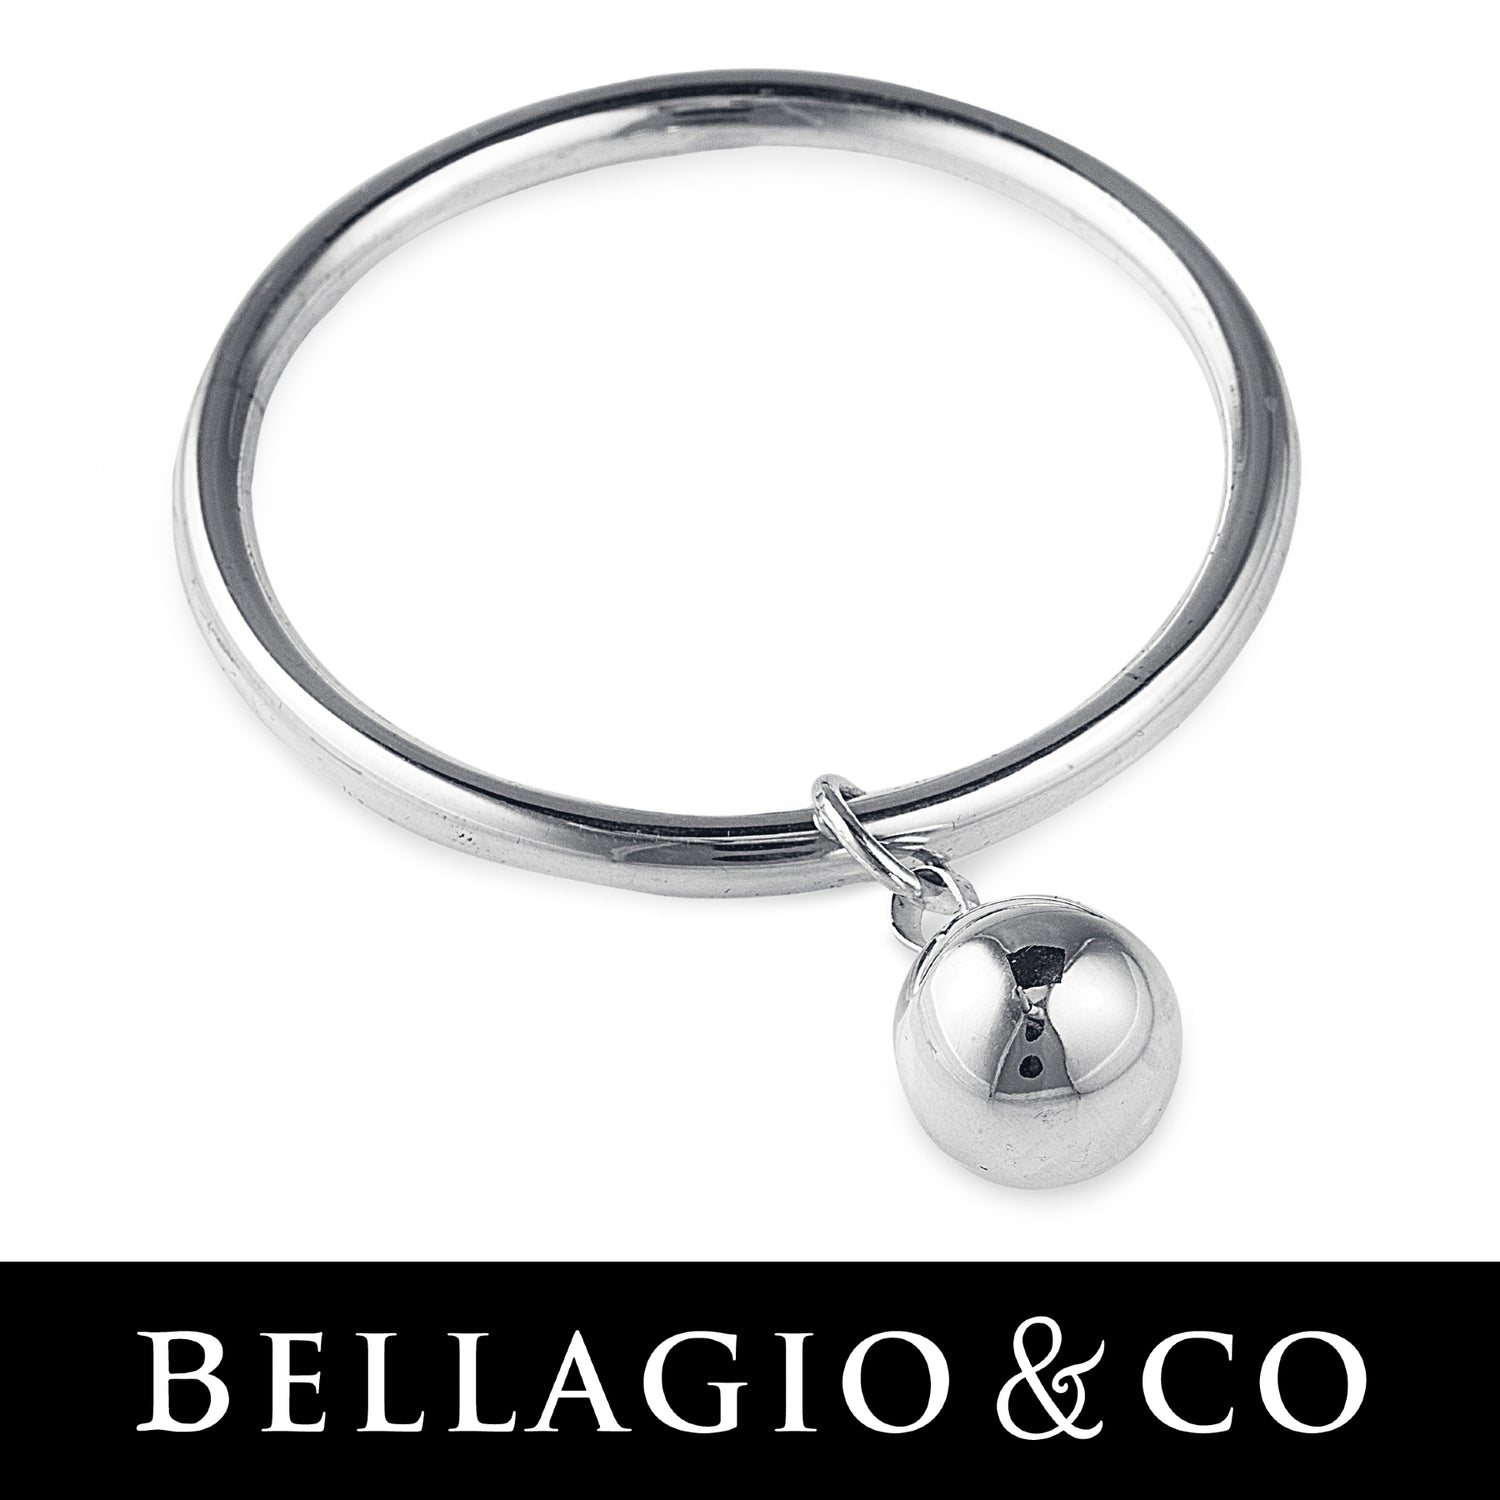 Browse the range of 925 sterling silver bangles.  Worldwide shipping plus FREE shipping for orders over $150.00 within Australia.